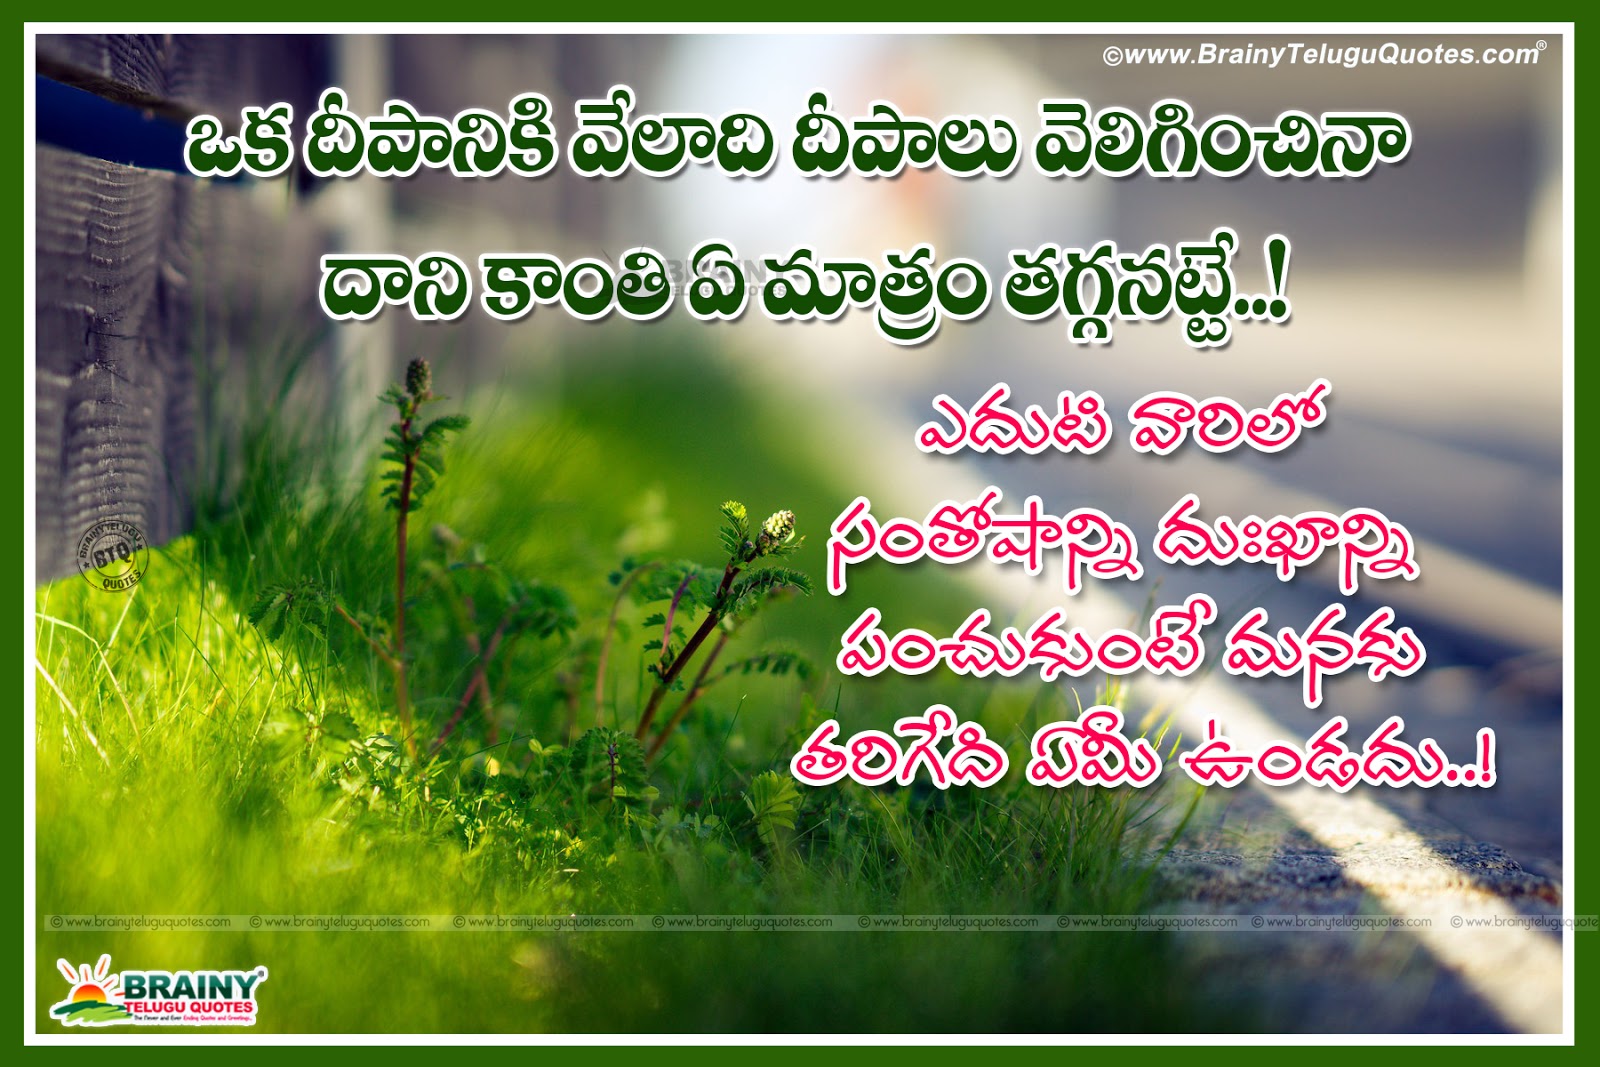 Beautiful Telugu Messages Quotes about HelpingBeing Human